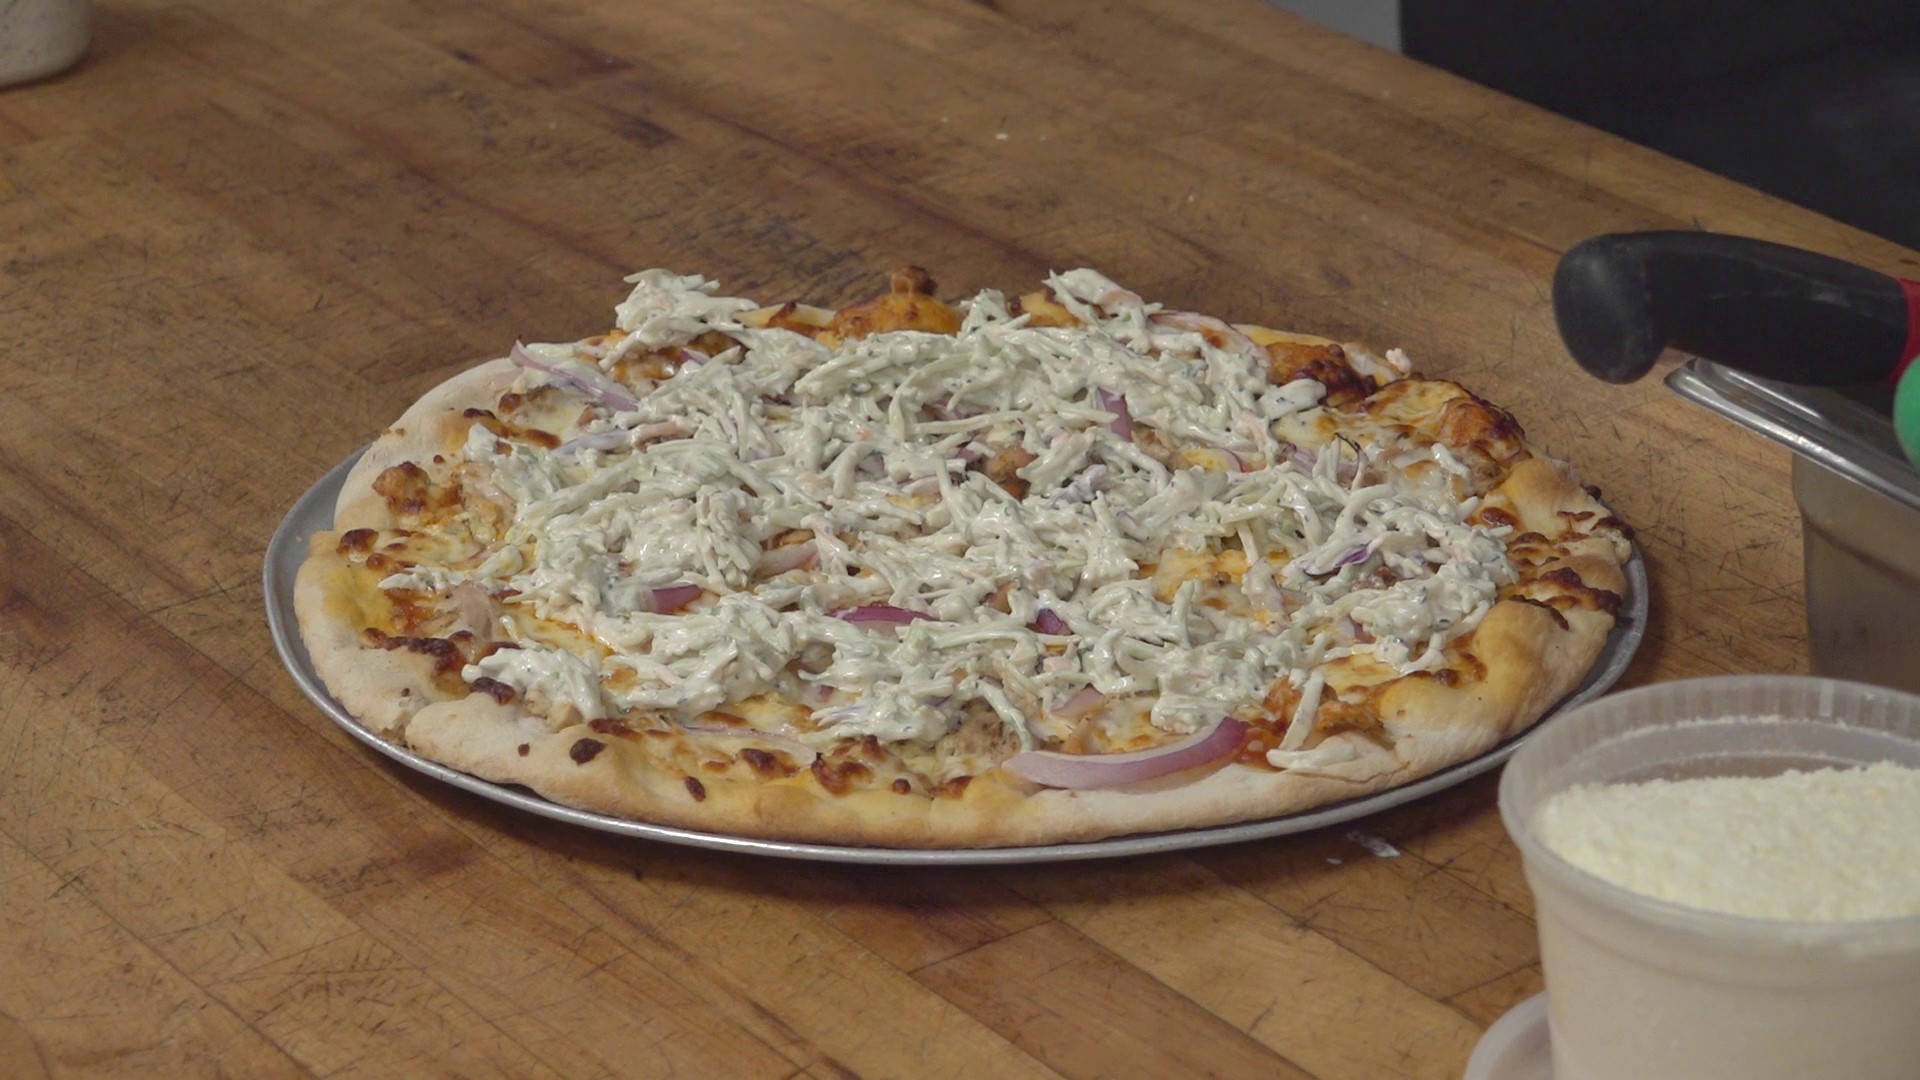 Gusto Pizza Bar and Truman's KC Pizza Tavern in Des Moines have created specialty pizzas named after players in Sunday's game.